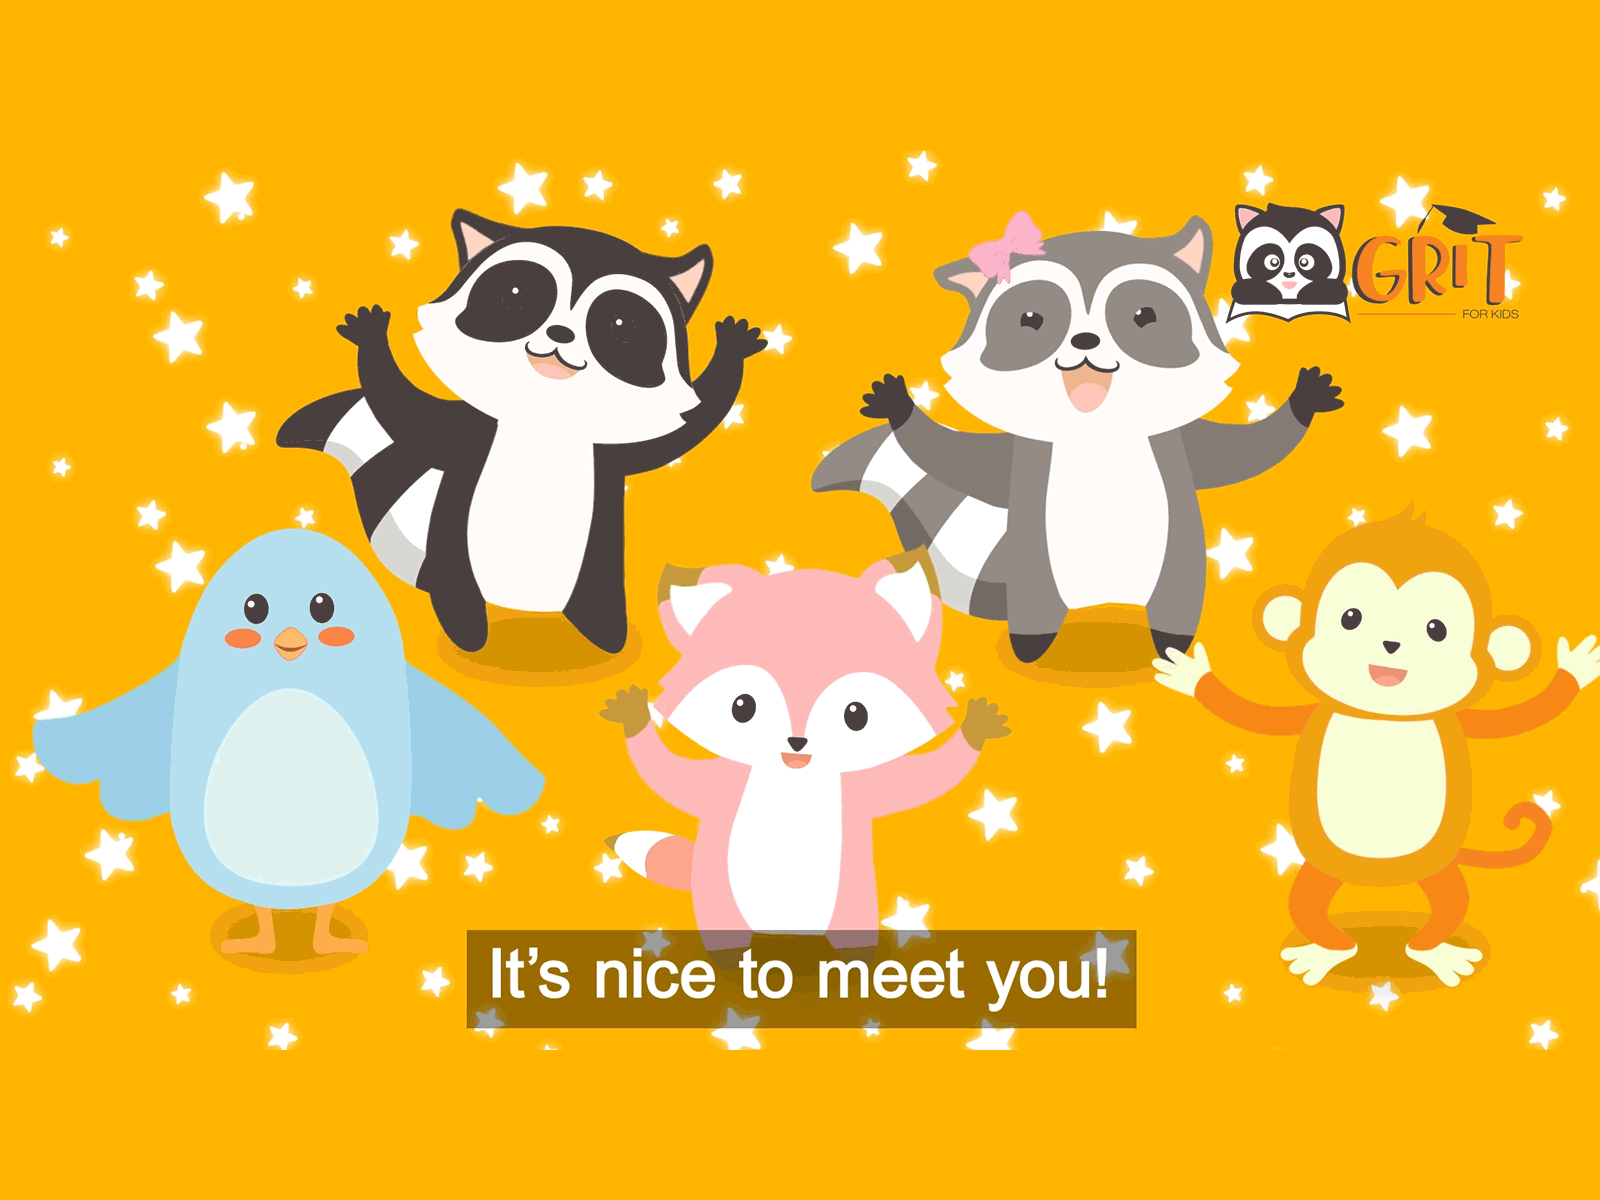 Dancing Cute Animals by Irene on Dribbble